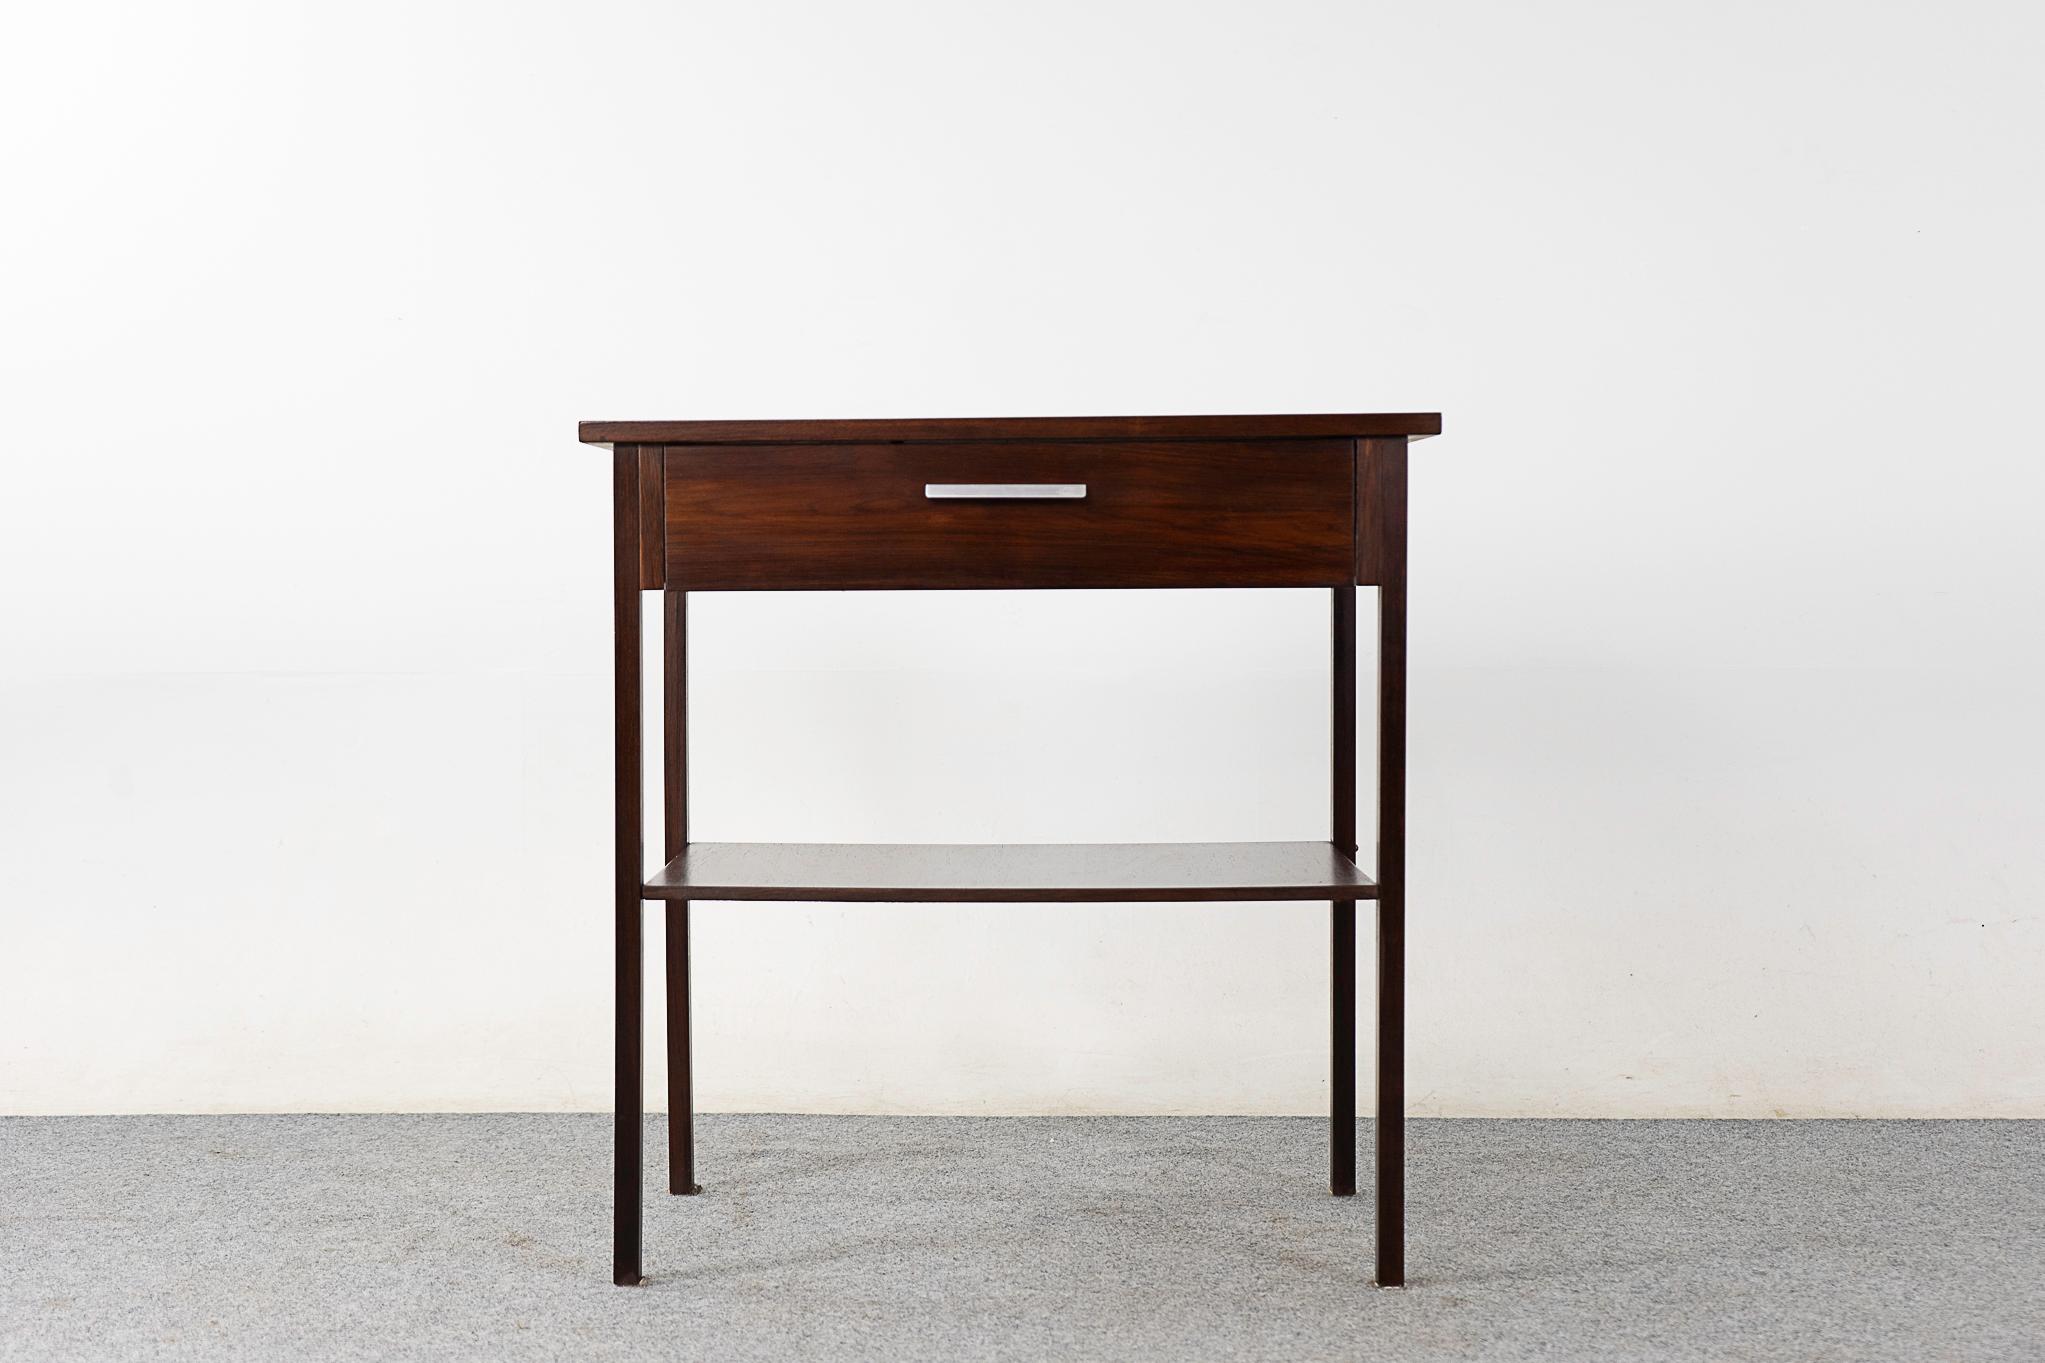 Rosewood mid-century side table, circa 1960's. Solid wood construction on the base and handsome book-matched veneer on the flat surfaces. Sleek drawer and lower shelf, pop this by your front door!

Please inquire for remote and international